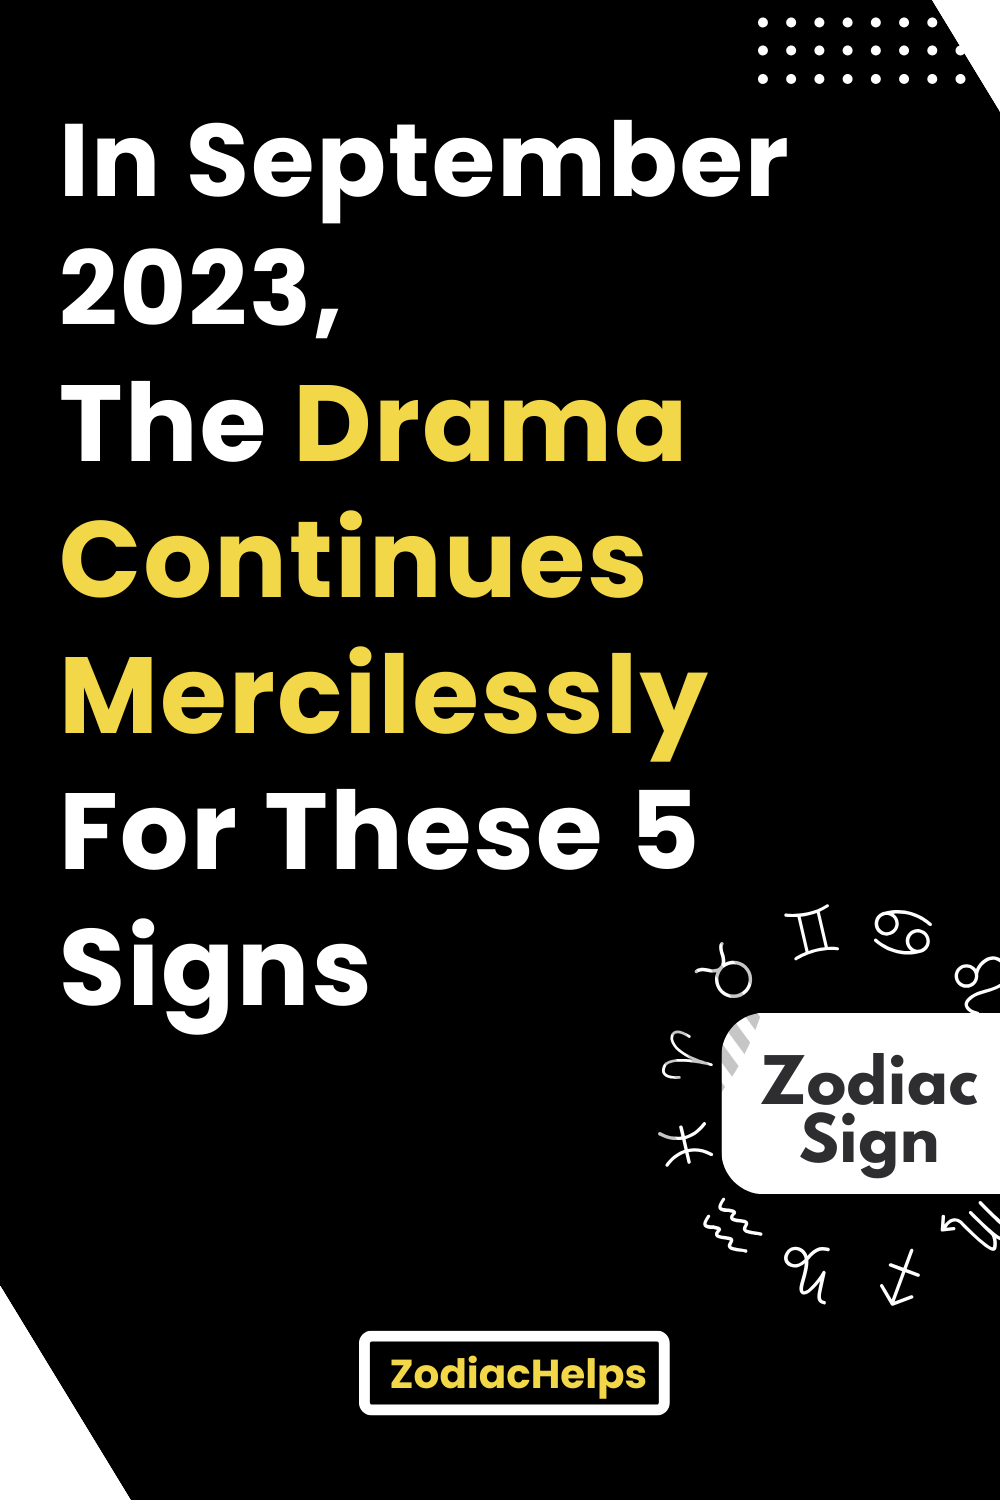 In September 2023, The Drama Continues Mercilessly For These 5 Signs